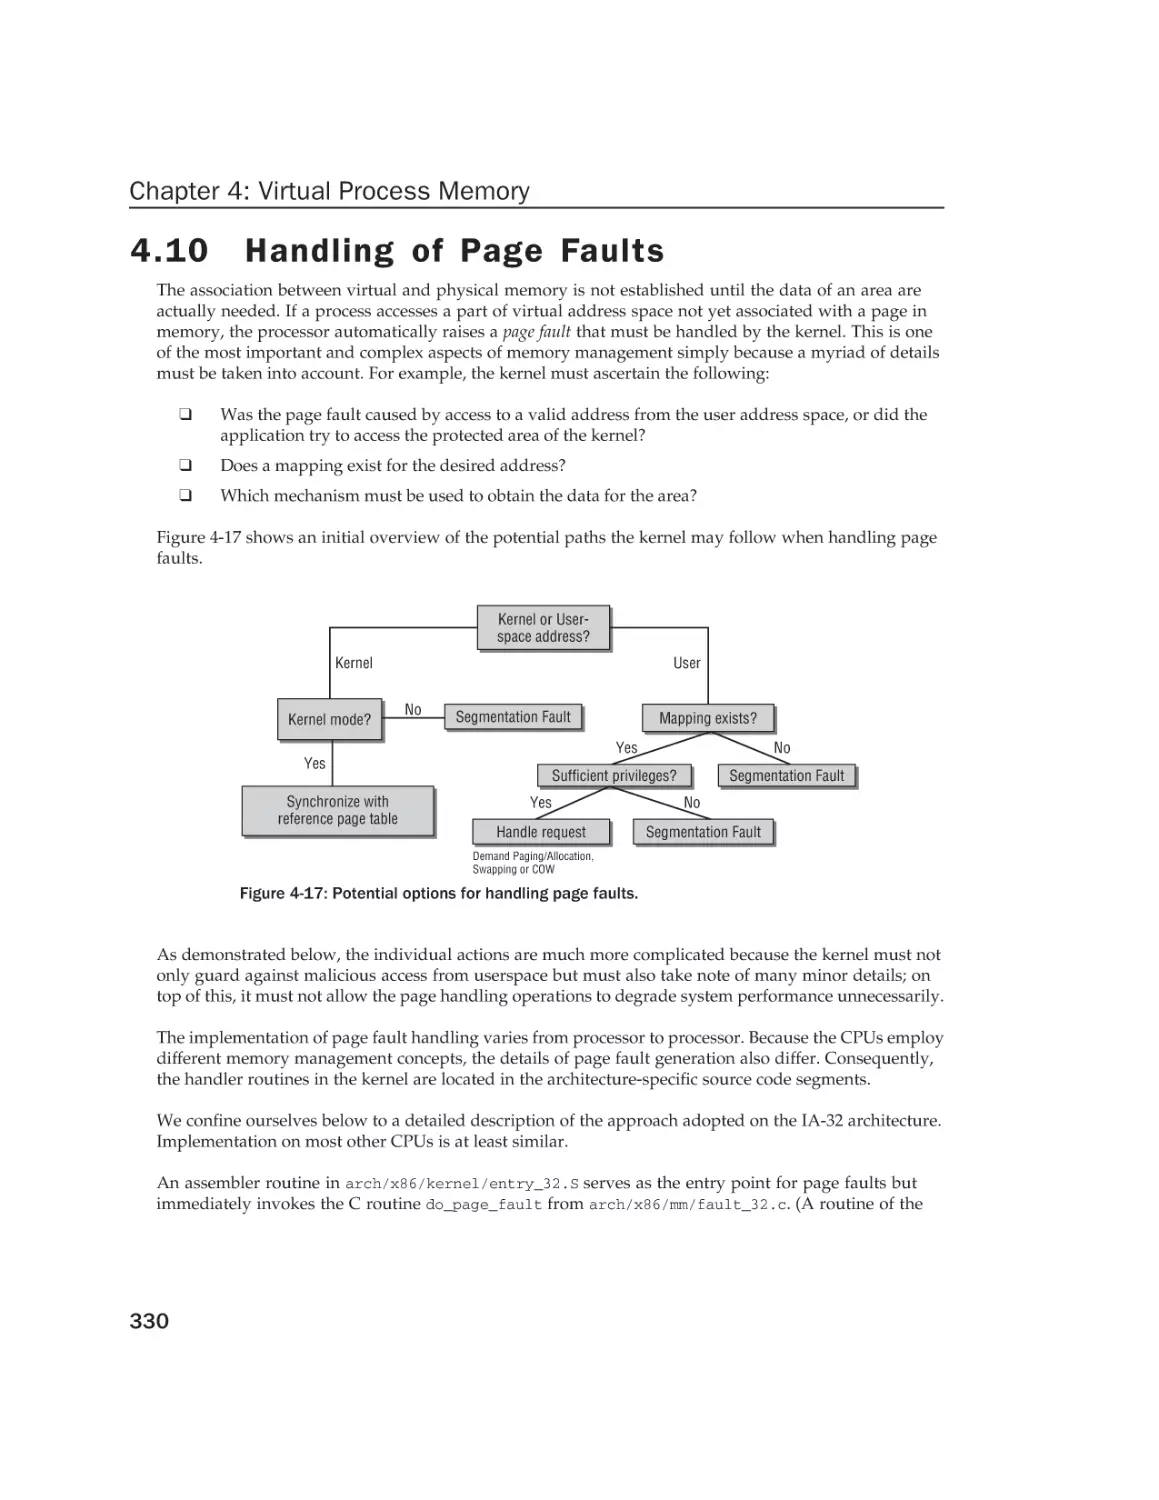 4.10 Handling of Page Faults